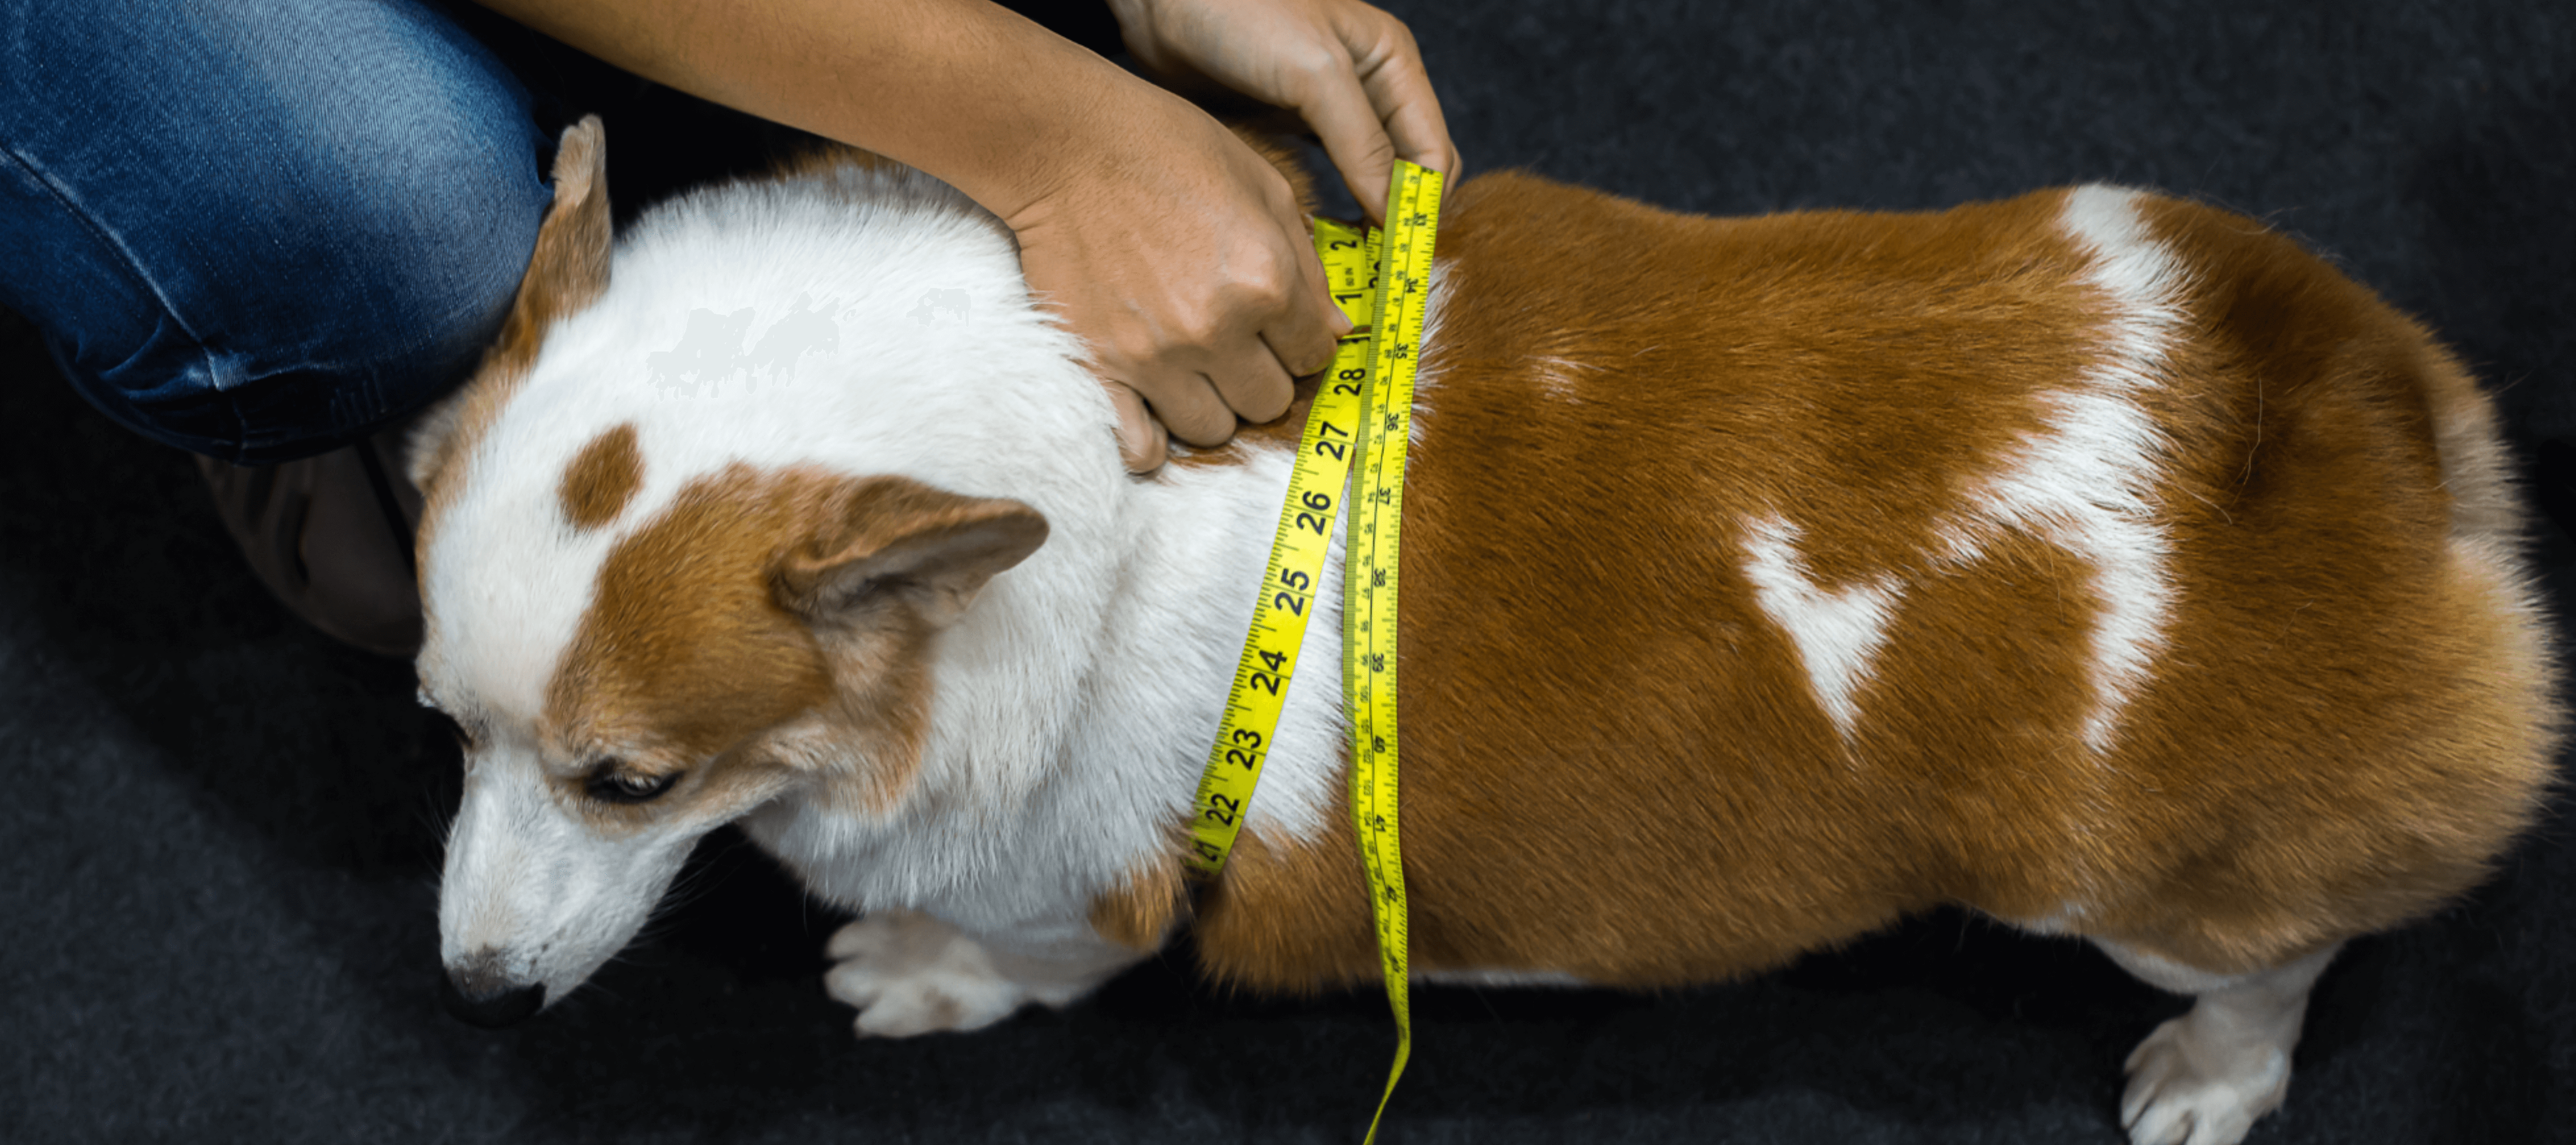 Ninety Percent of Owners Can't Identify if Their Pet is Overweight, Can You?